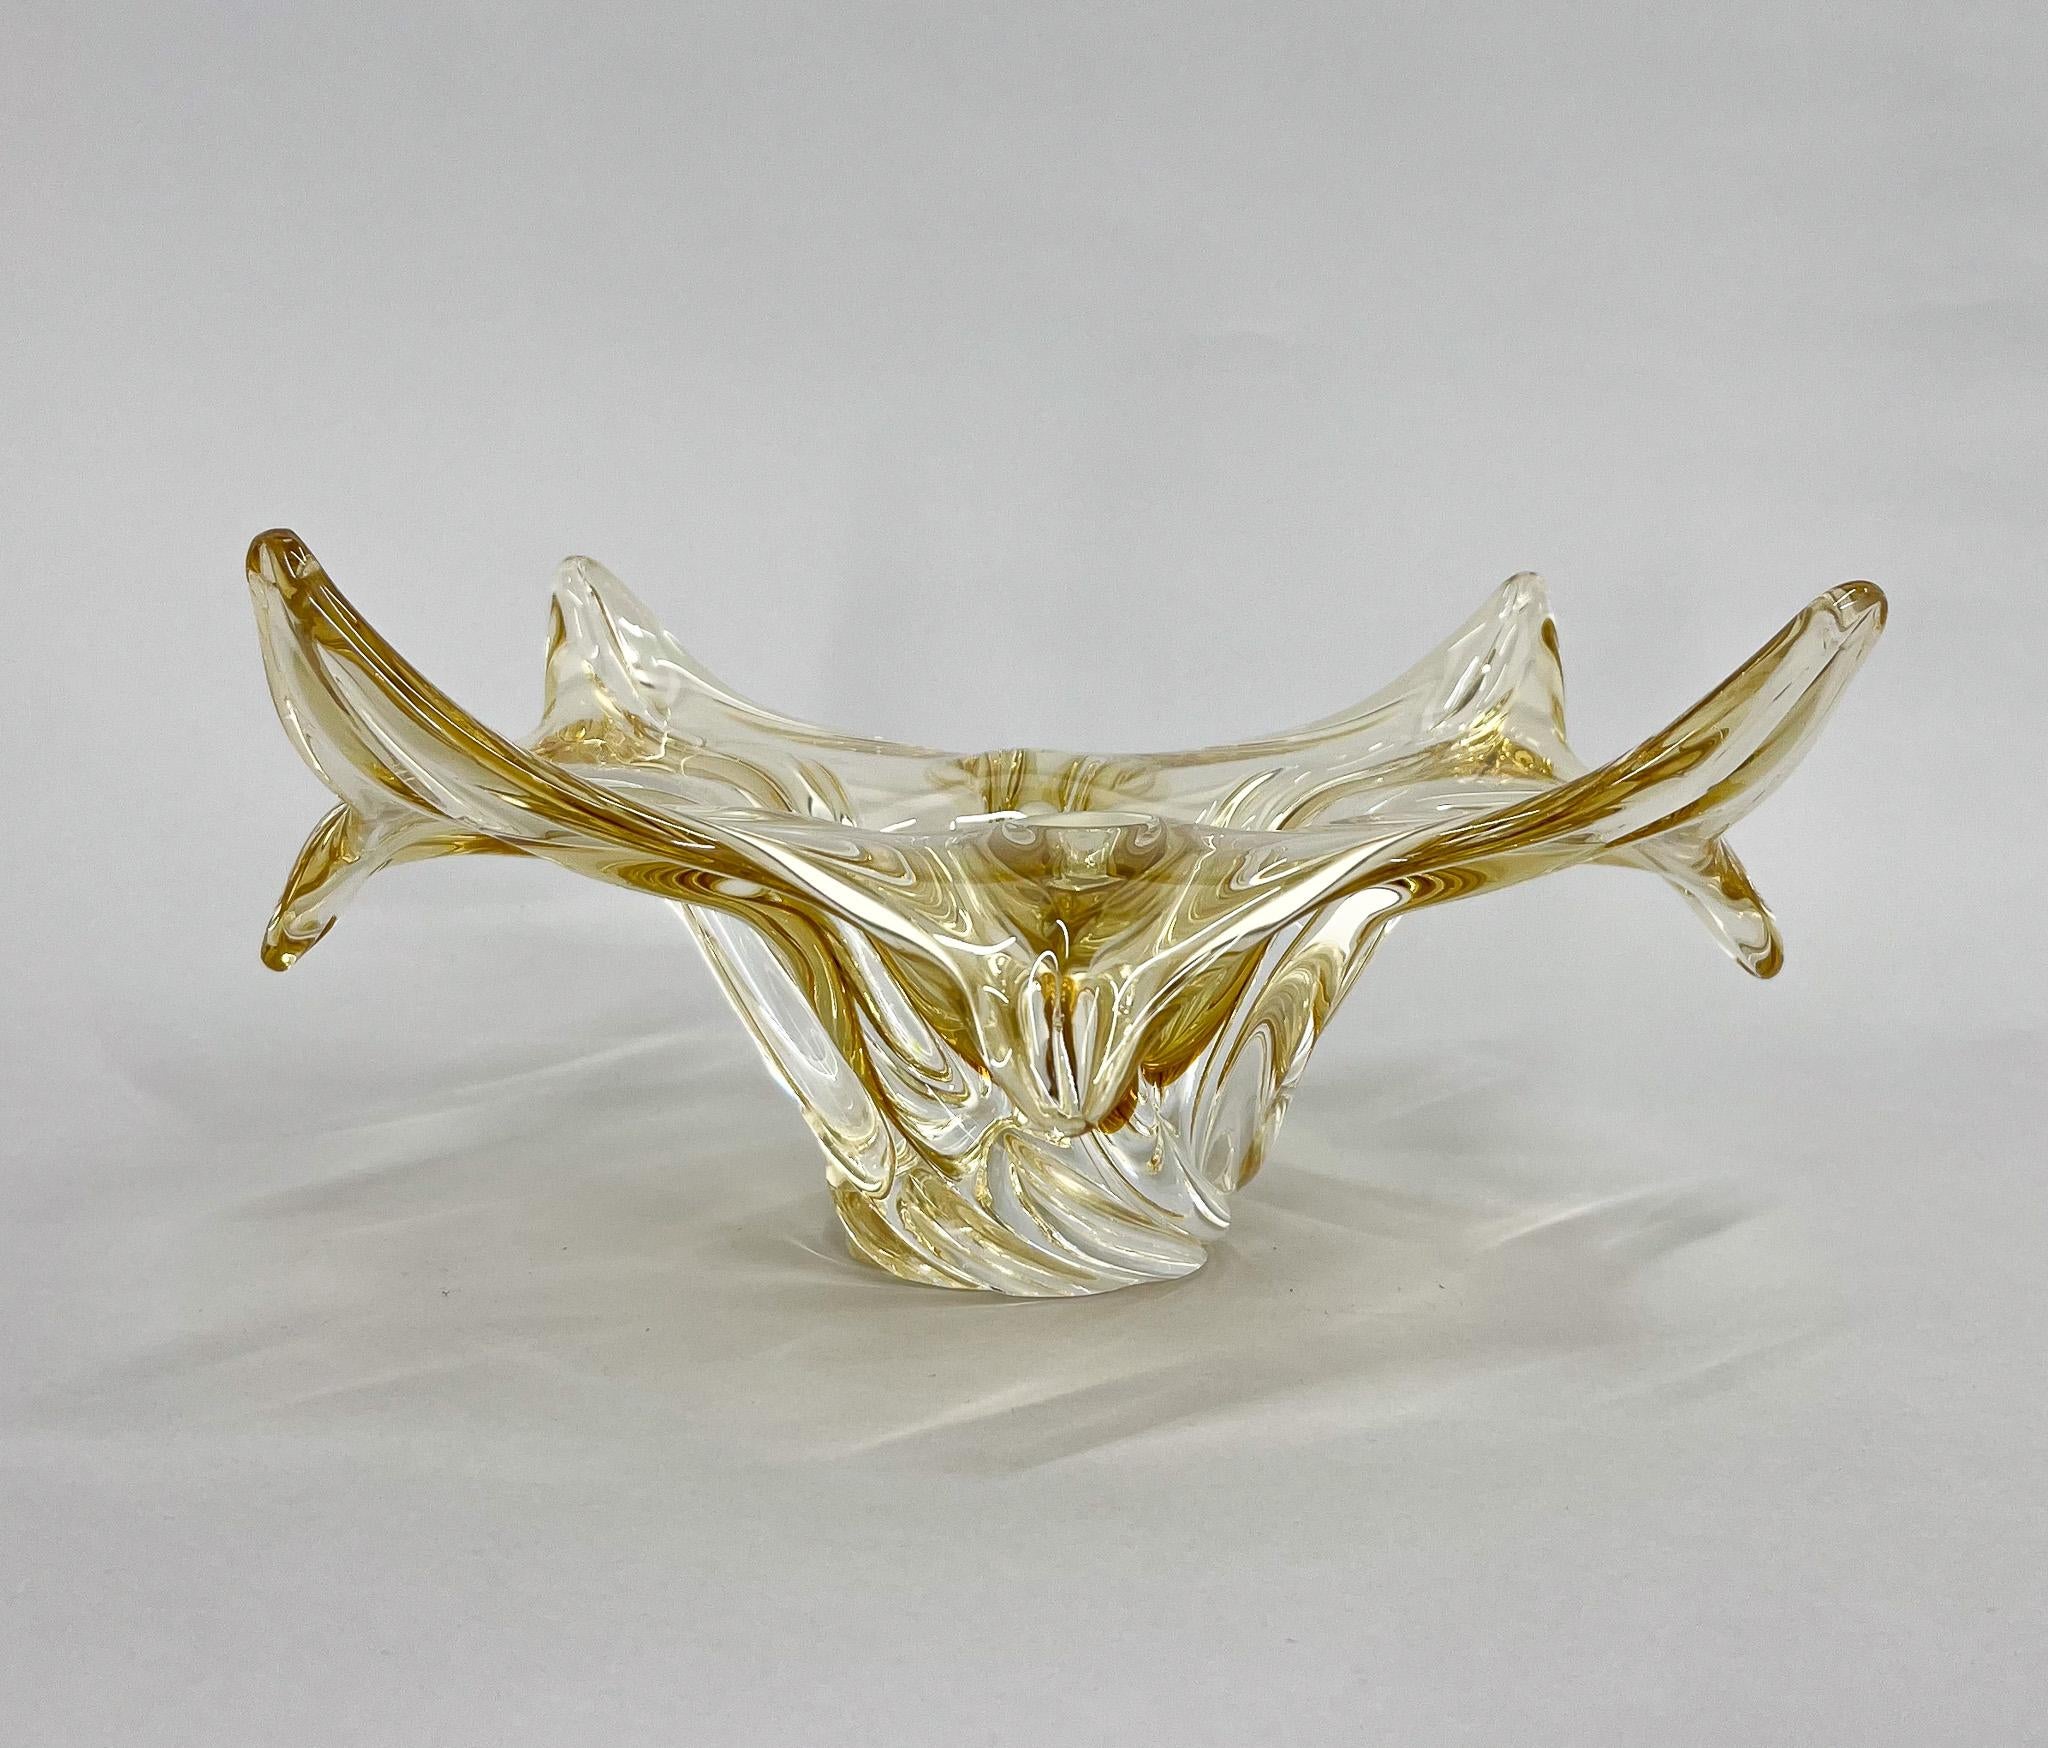 Heavy glass bowl designed by Josef Hospodka in the 1960s and manufactured by Chribska glassworks in Czechoslovakia. 